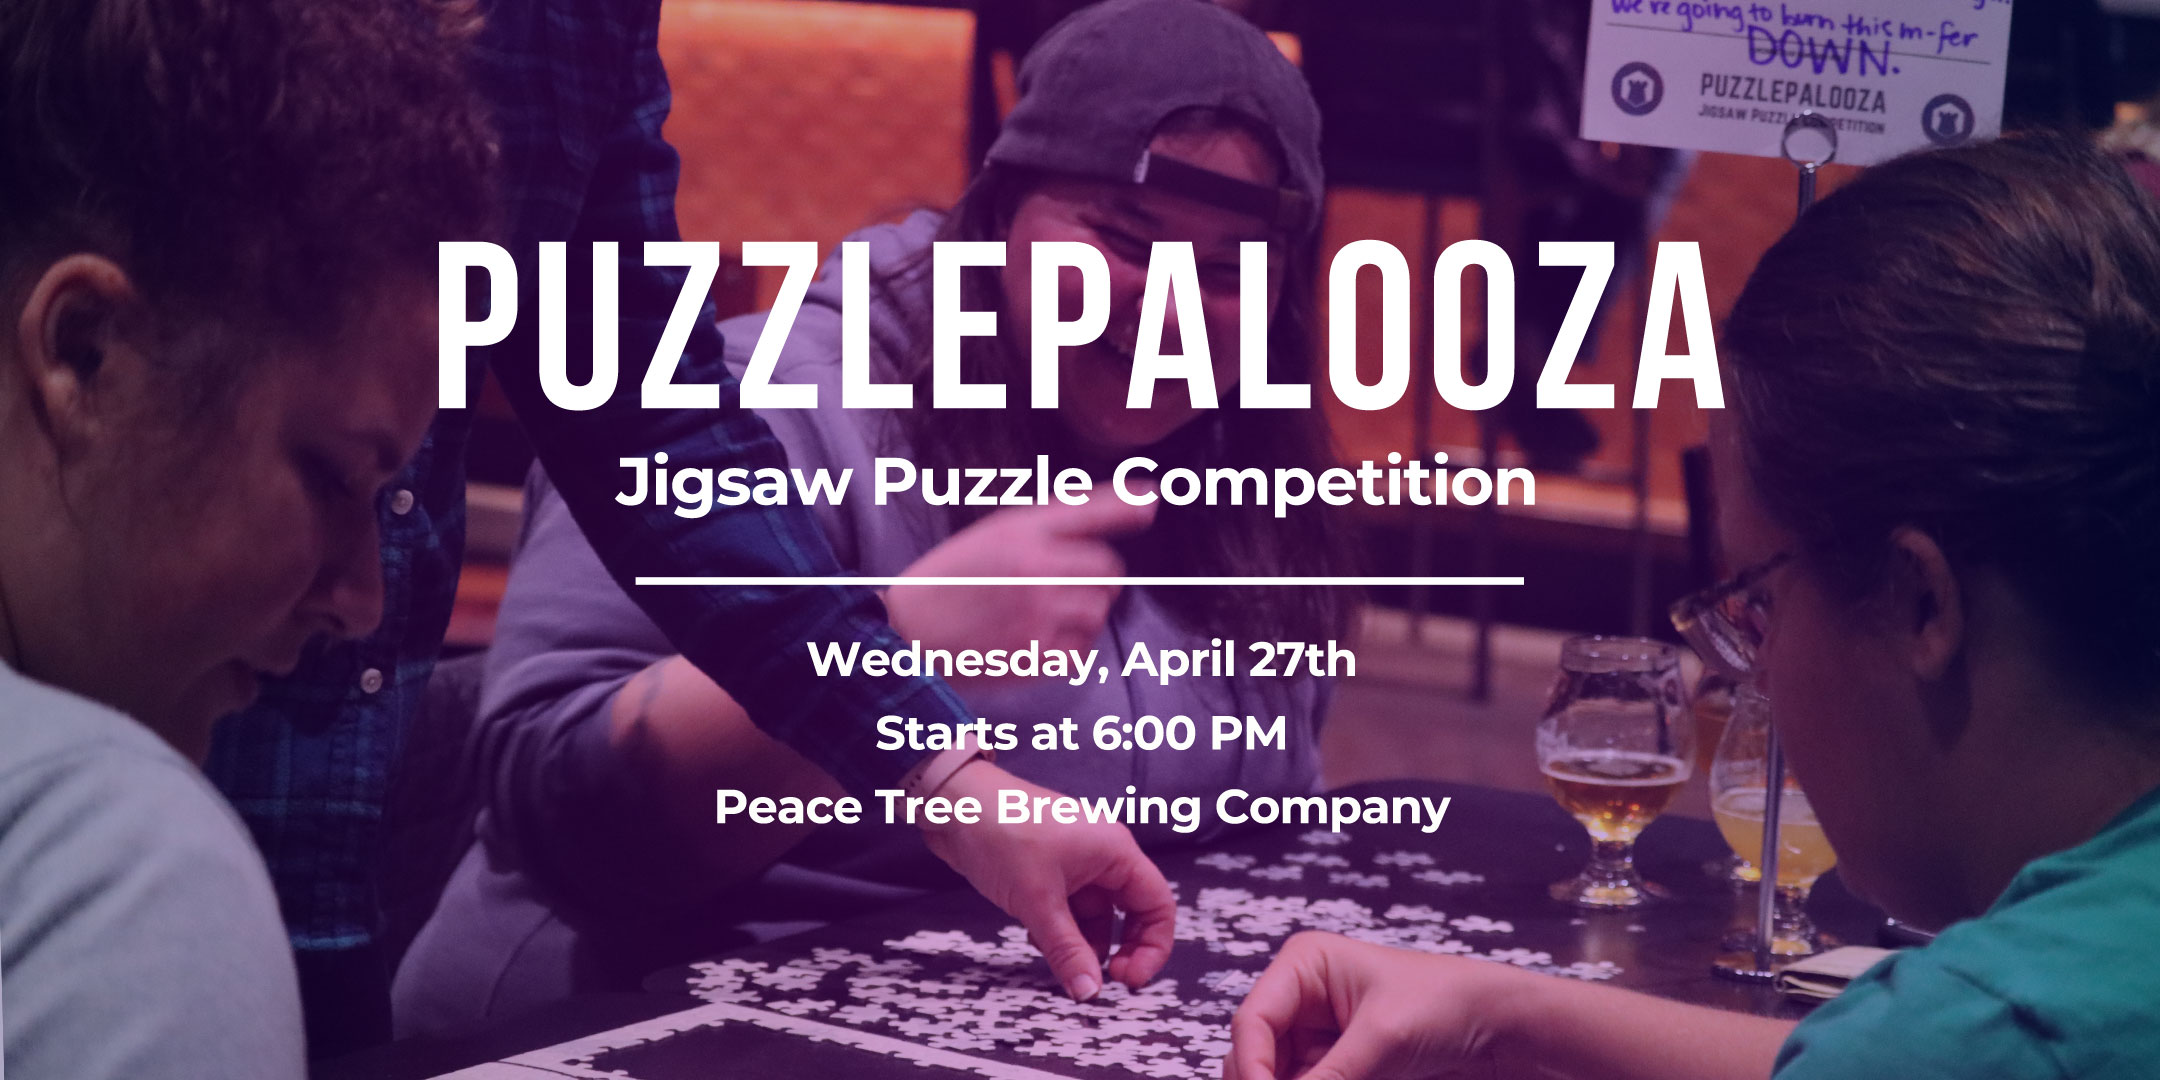 Puzzlepalooza Jigsaw Puzzle Competition Peace Tree Des Moines Branch April 27, 2022 Info Banner